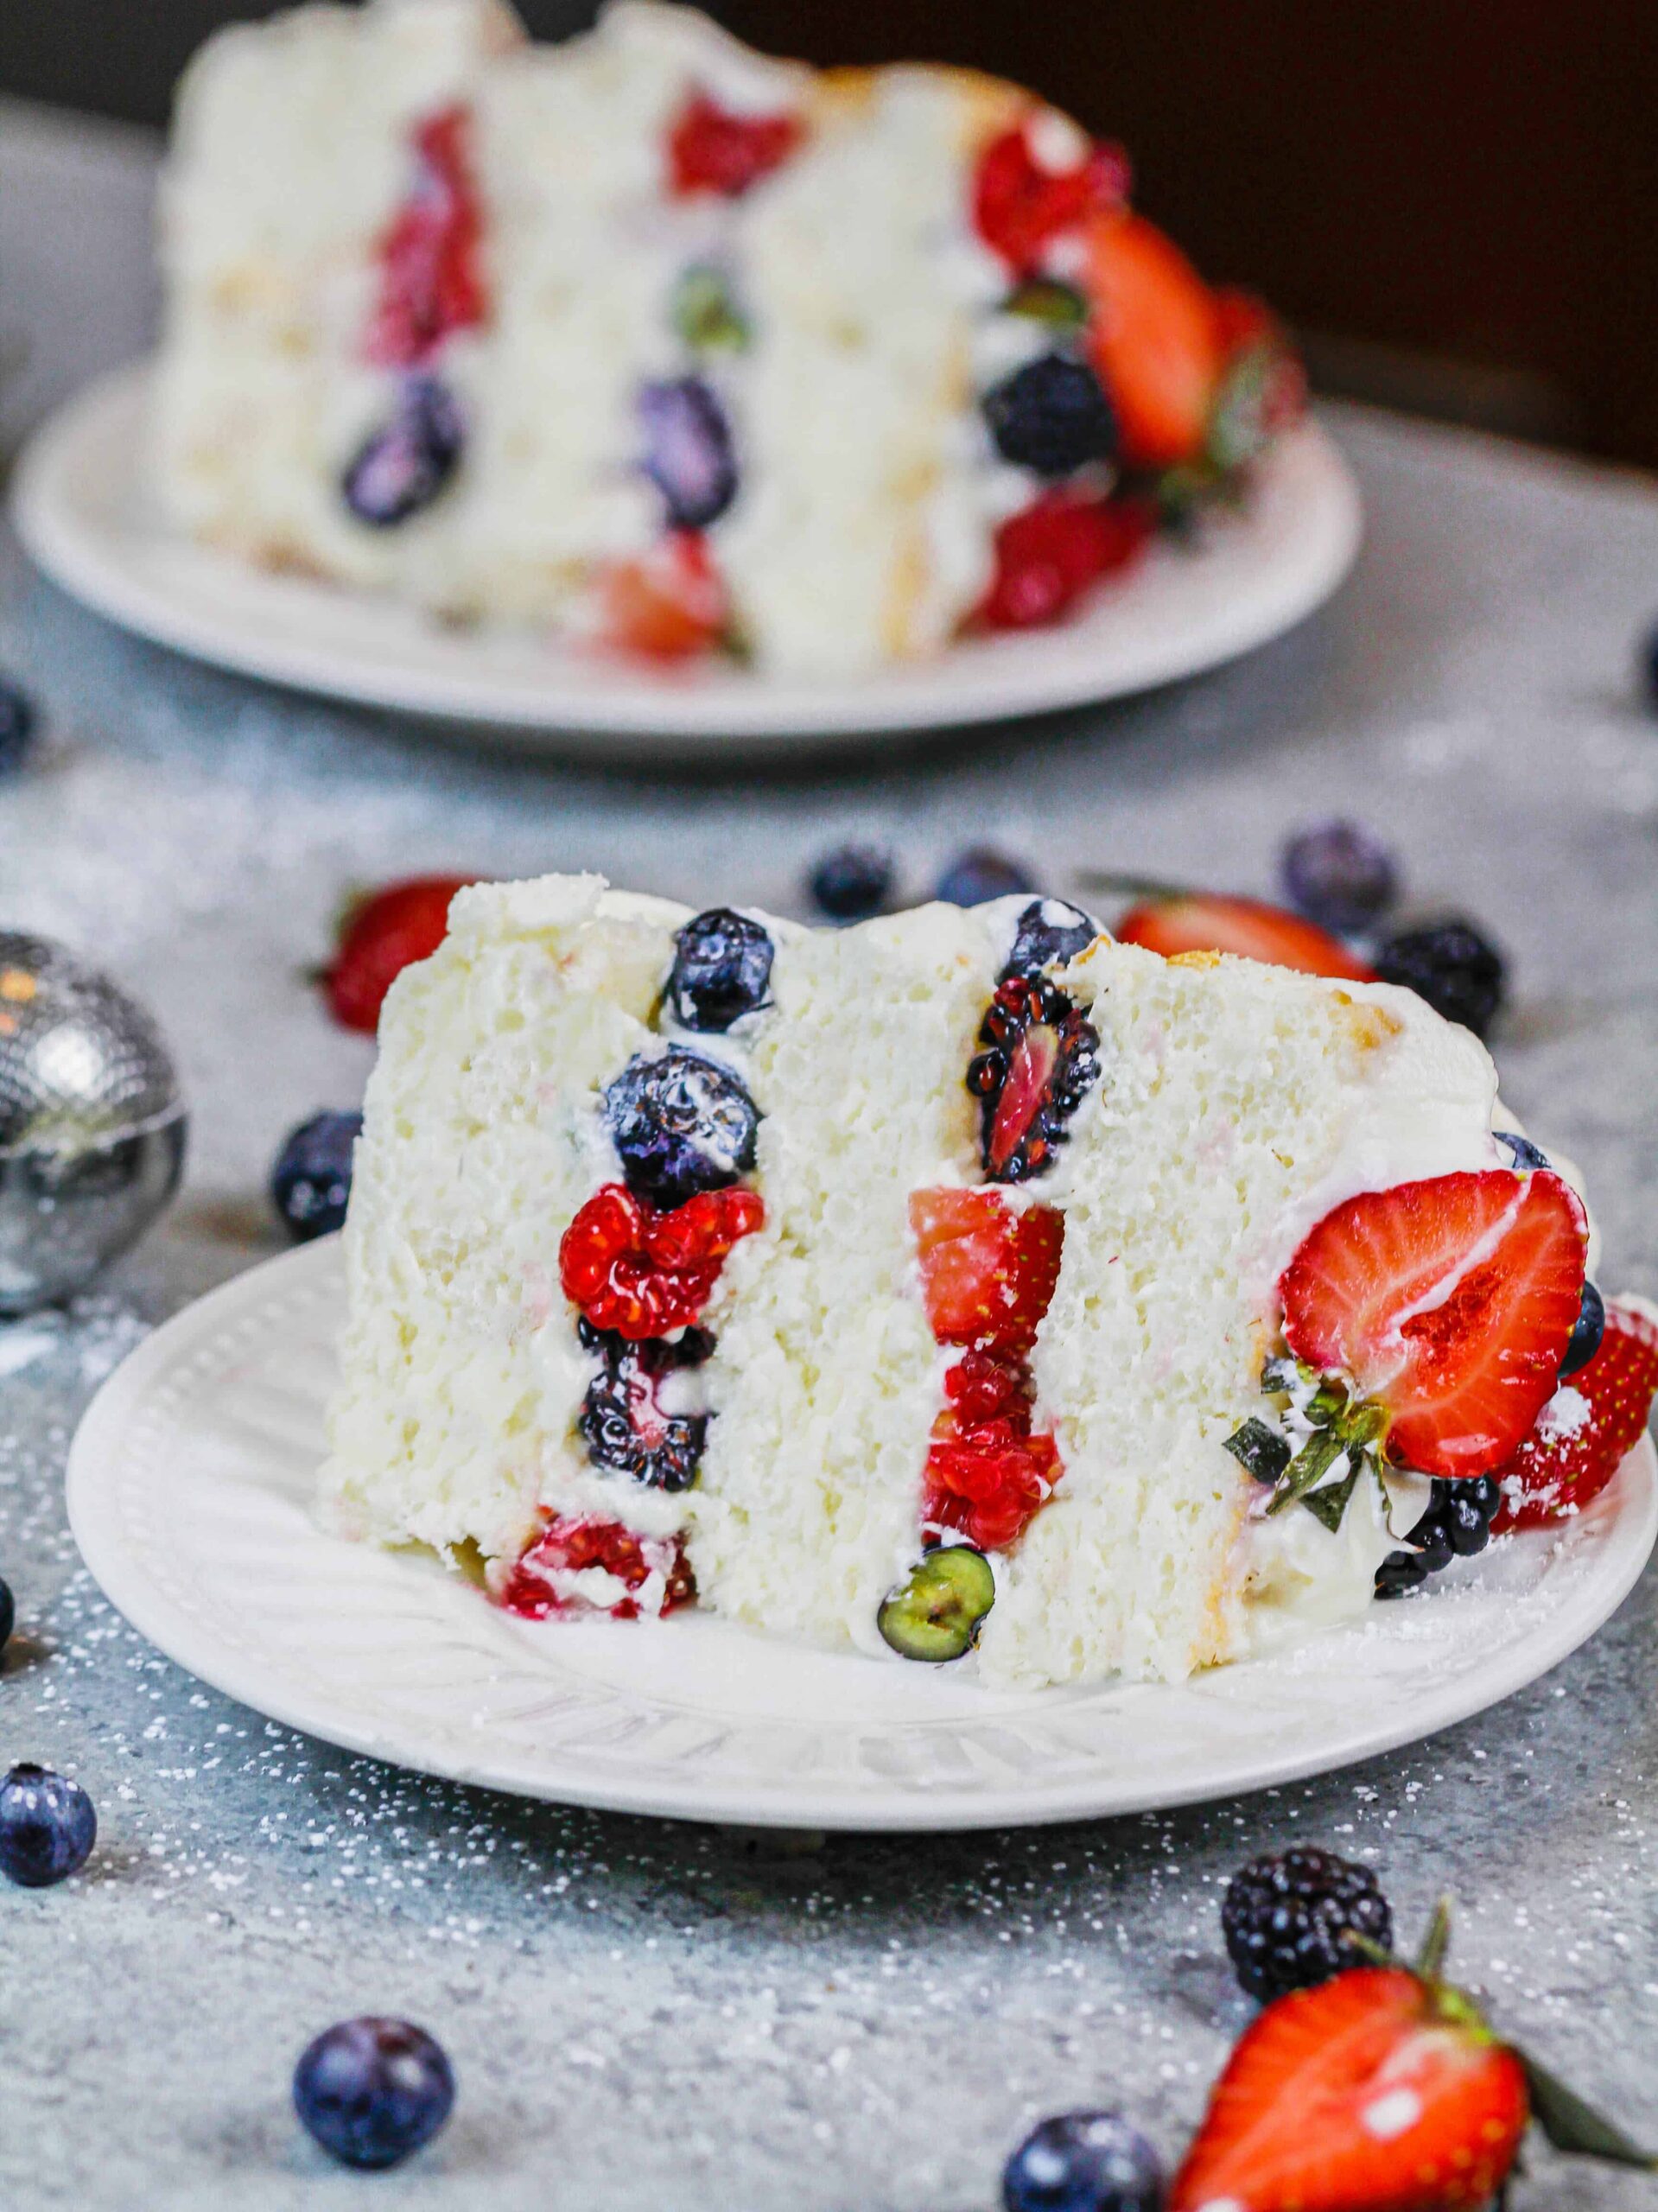 image of a slice of layered angel food cake filling with fresh berries and whipped cream frosting